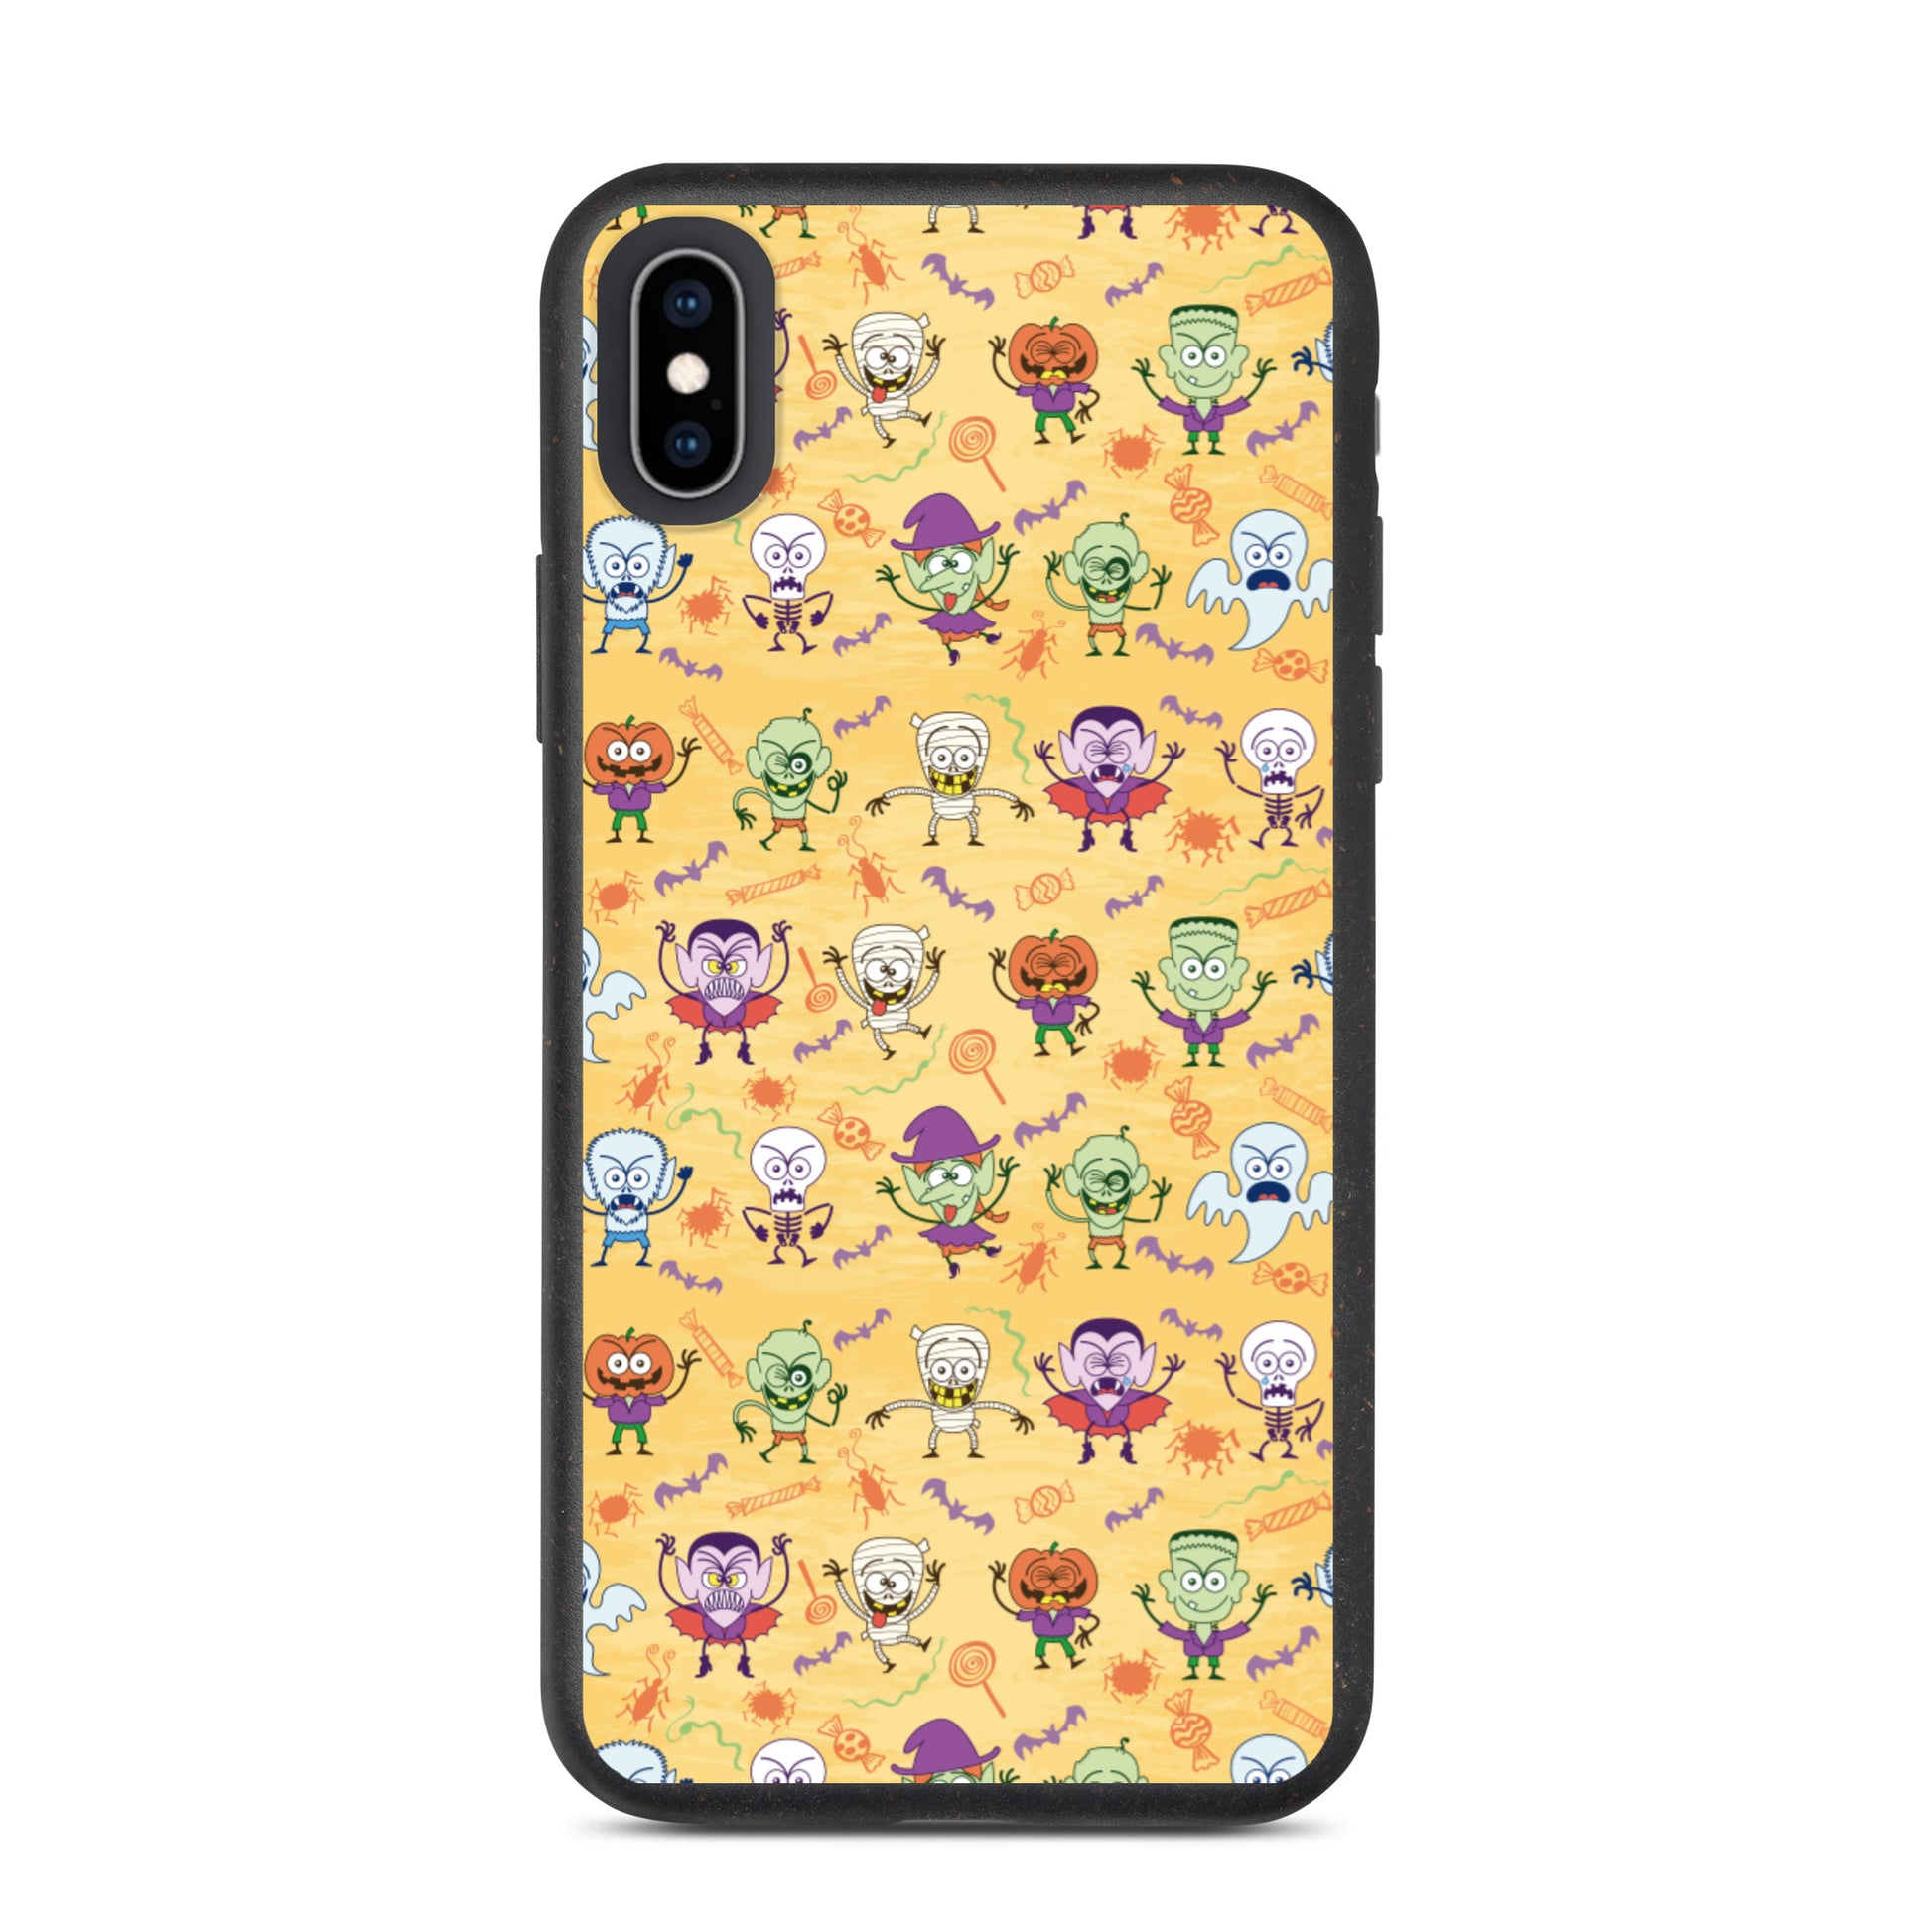 Halloween characters making funny faces Speckled iPhone case. IPhone XS Max